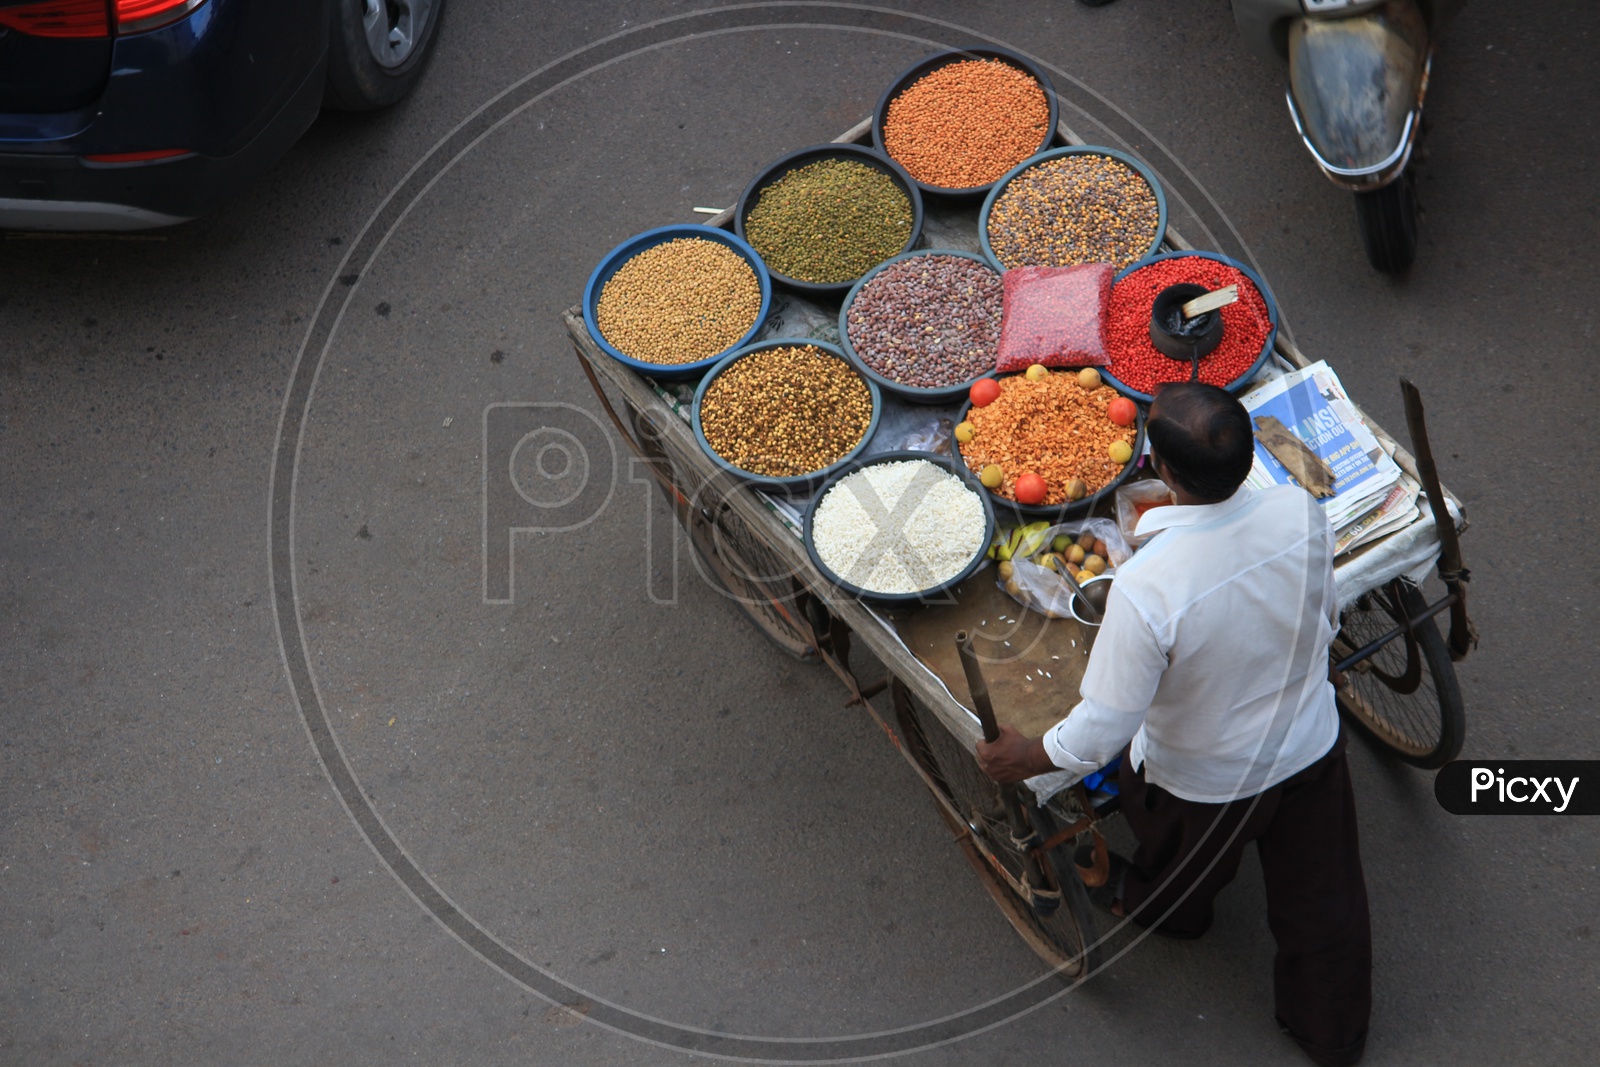 A Street Food Vendor  Selling Spiced Pulses At Charminar